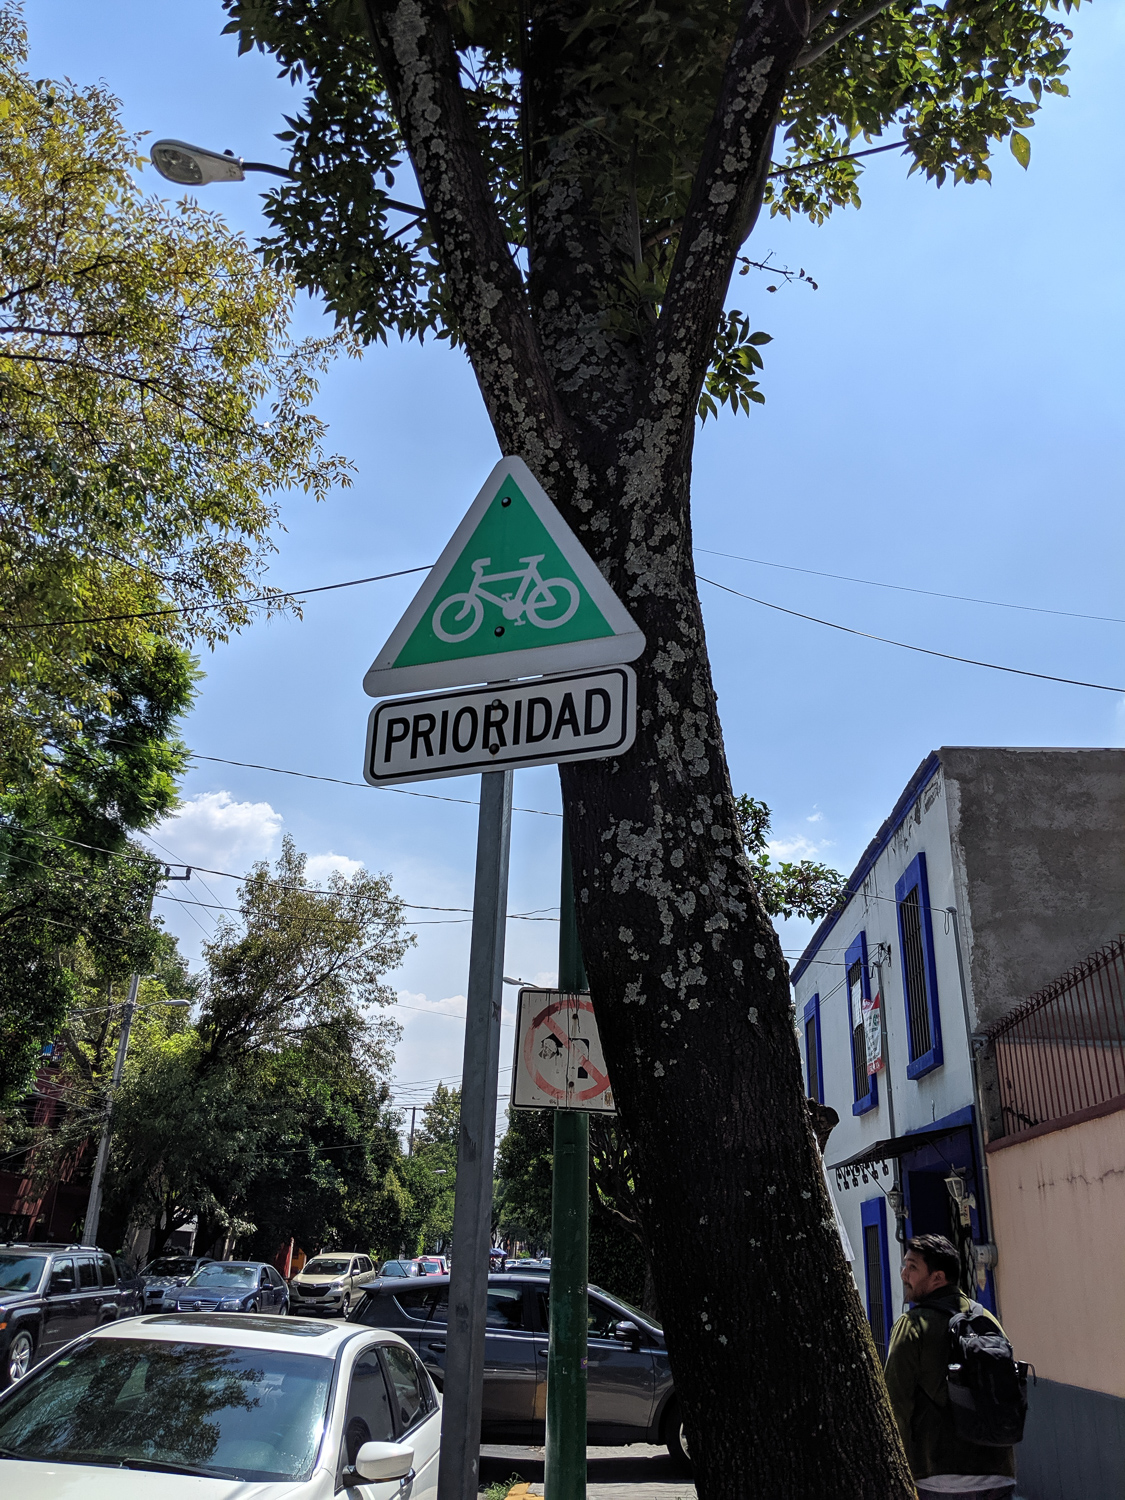  The roads are narrower, but the sidewalks are reminiscent of home - sometimes narrow and sometimes wide, but scattered with cracks, trees, bikes, and signs. There were roundabouts at what seemed like every major intersection, and even they had publi